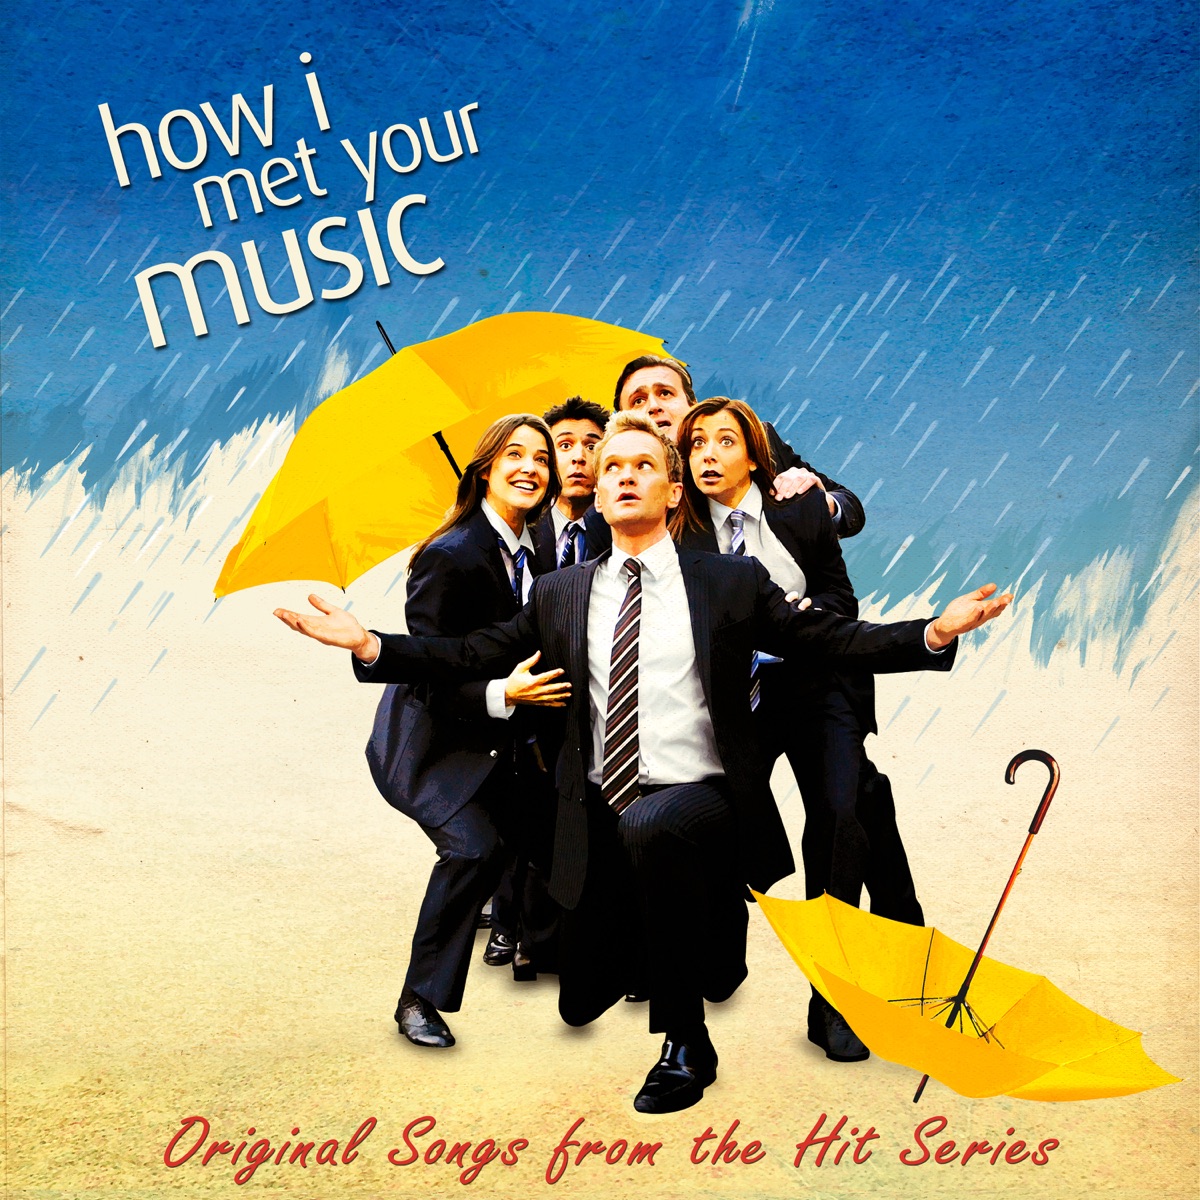 ‎How I Met Your Music (Original Songs from the Hit Series "How I Met Your  Mother") by Various Artists on Apple Music